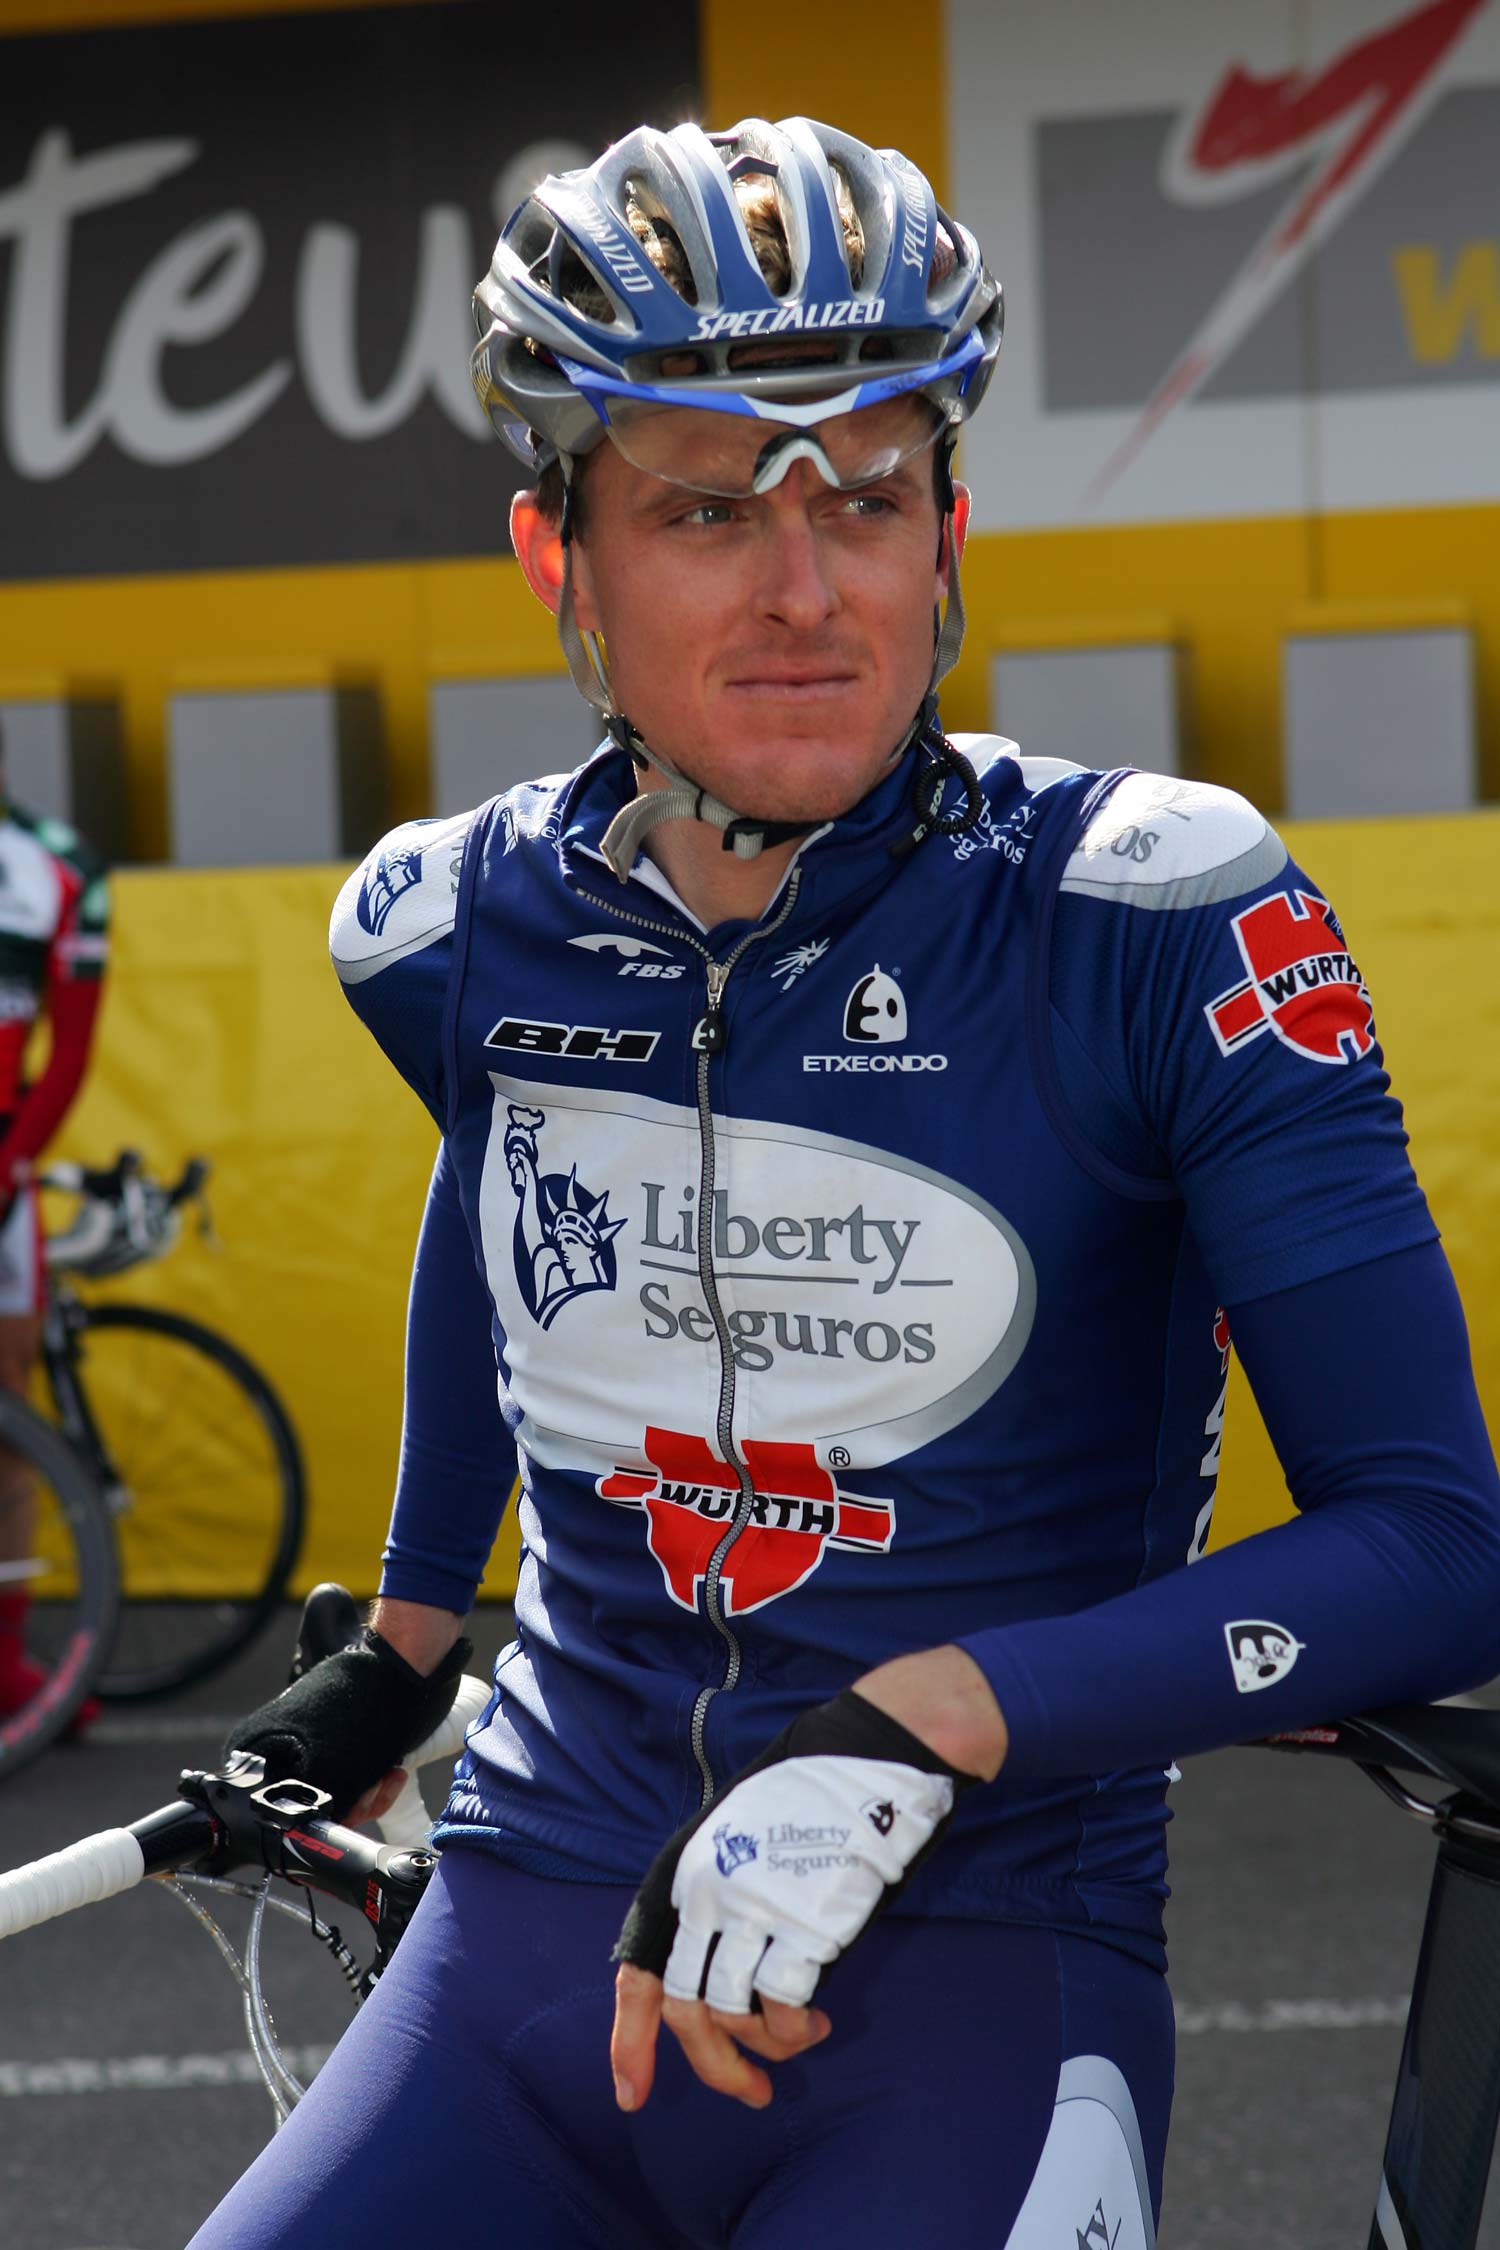 Jörg Jaksche (above) was part of Liberty Seguros’ top-tier team and due to contest his seventh Tour de France. But the arrest of his team manager on 23 May 2006 heralded the beginning of the end of his career. Photo: Yuzuru Sunada